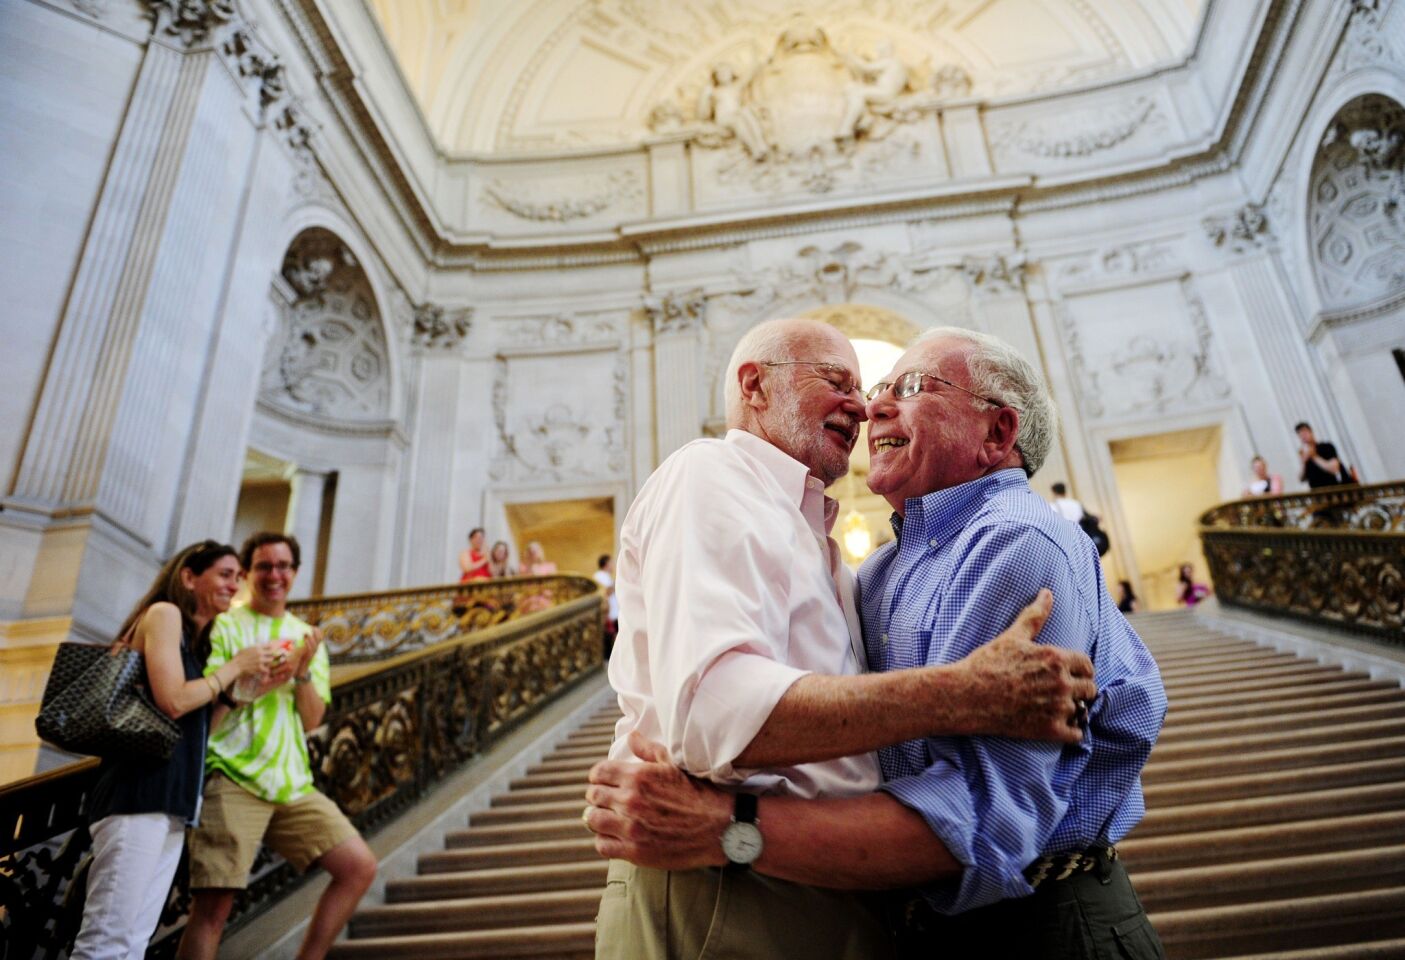 George Lucas, left, and Tom Rothgiesser, both 79, who met in Johannesburg, South Africa, and have been dating for 50 years, got married in San Francisco on Saturday.